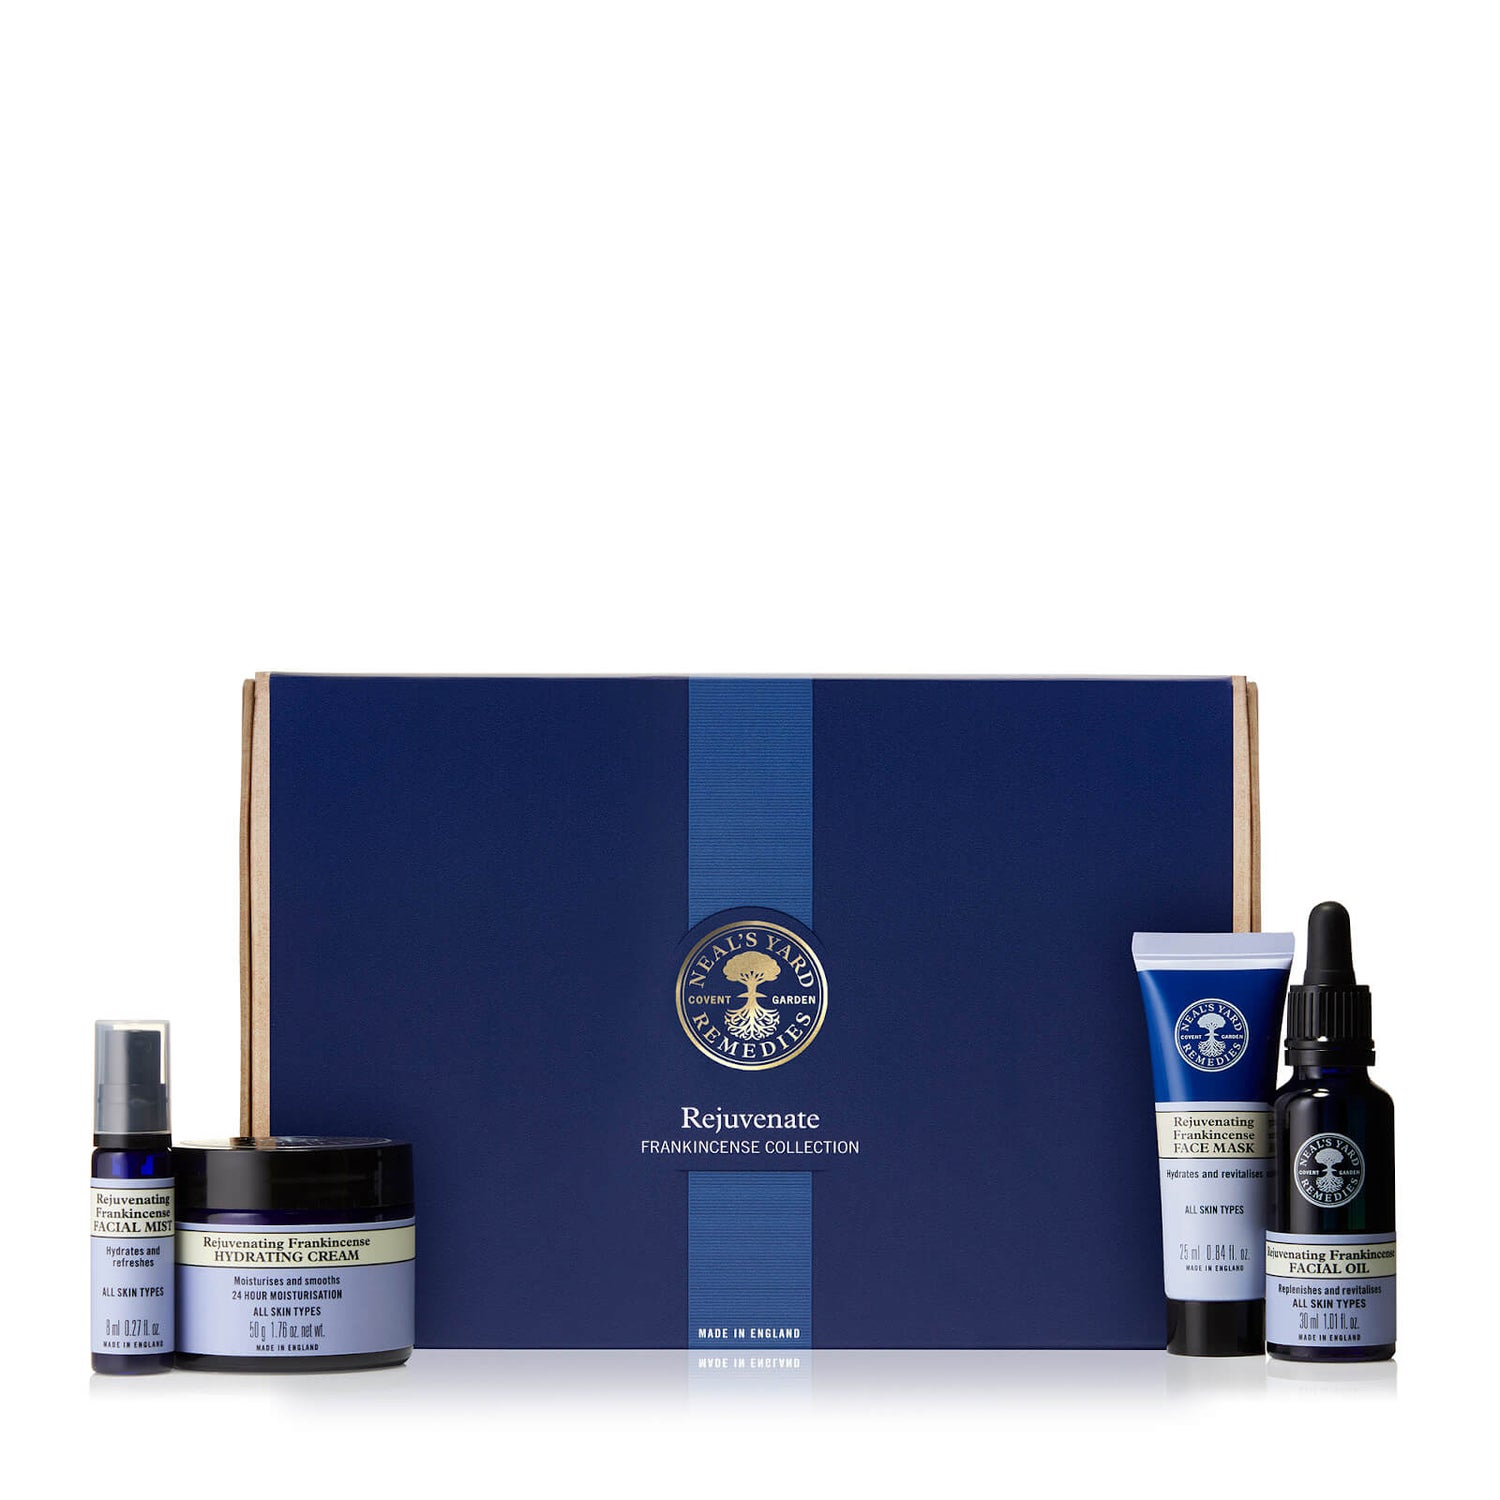 Neal's Yard Remedies Rejuvenating Frankincense Collection (£80.00)